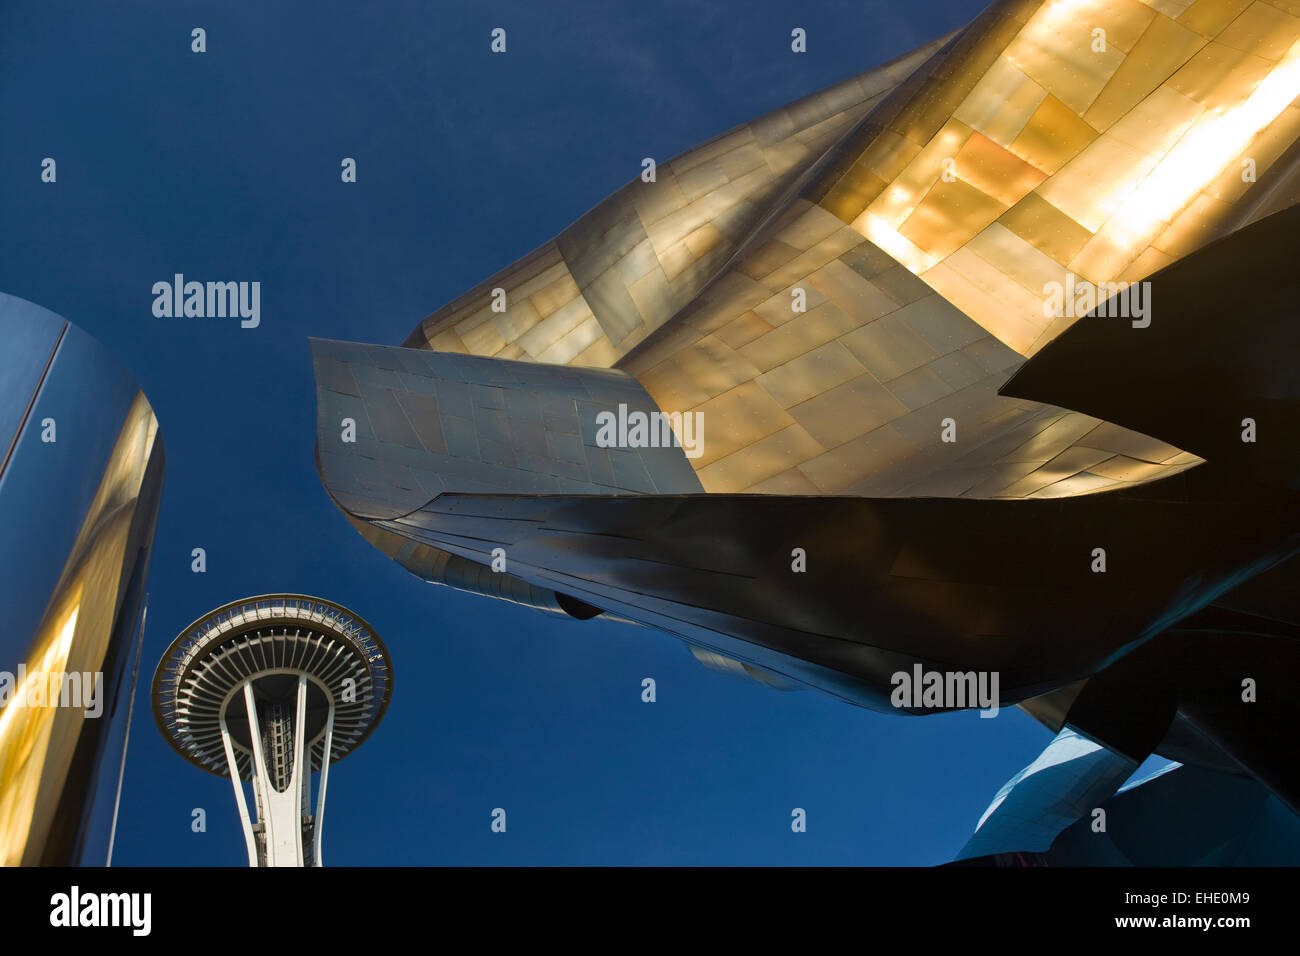 STORICO PROGETTO MUSICALE 2009 SPACE NEEDLE EXPERIENCE (© FRANK GEHRY 1995) SPACE NEEDLE TOWER (©JOHN GRAHAM & CO 1961) SEATTLE WASHINGTON STATI UNITI Foto Stock